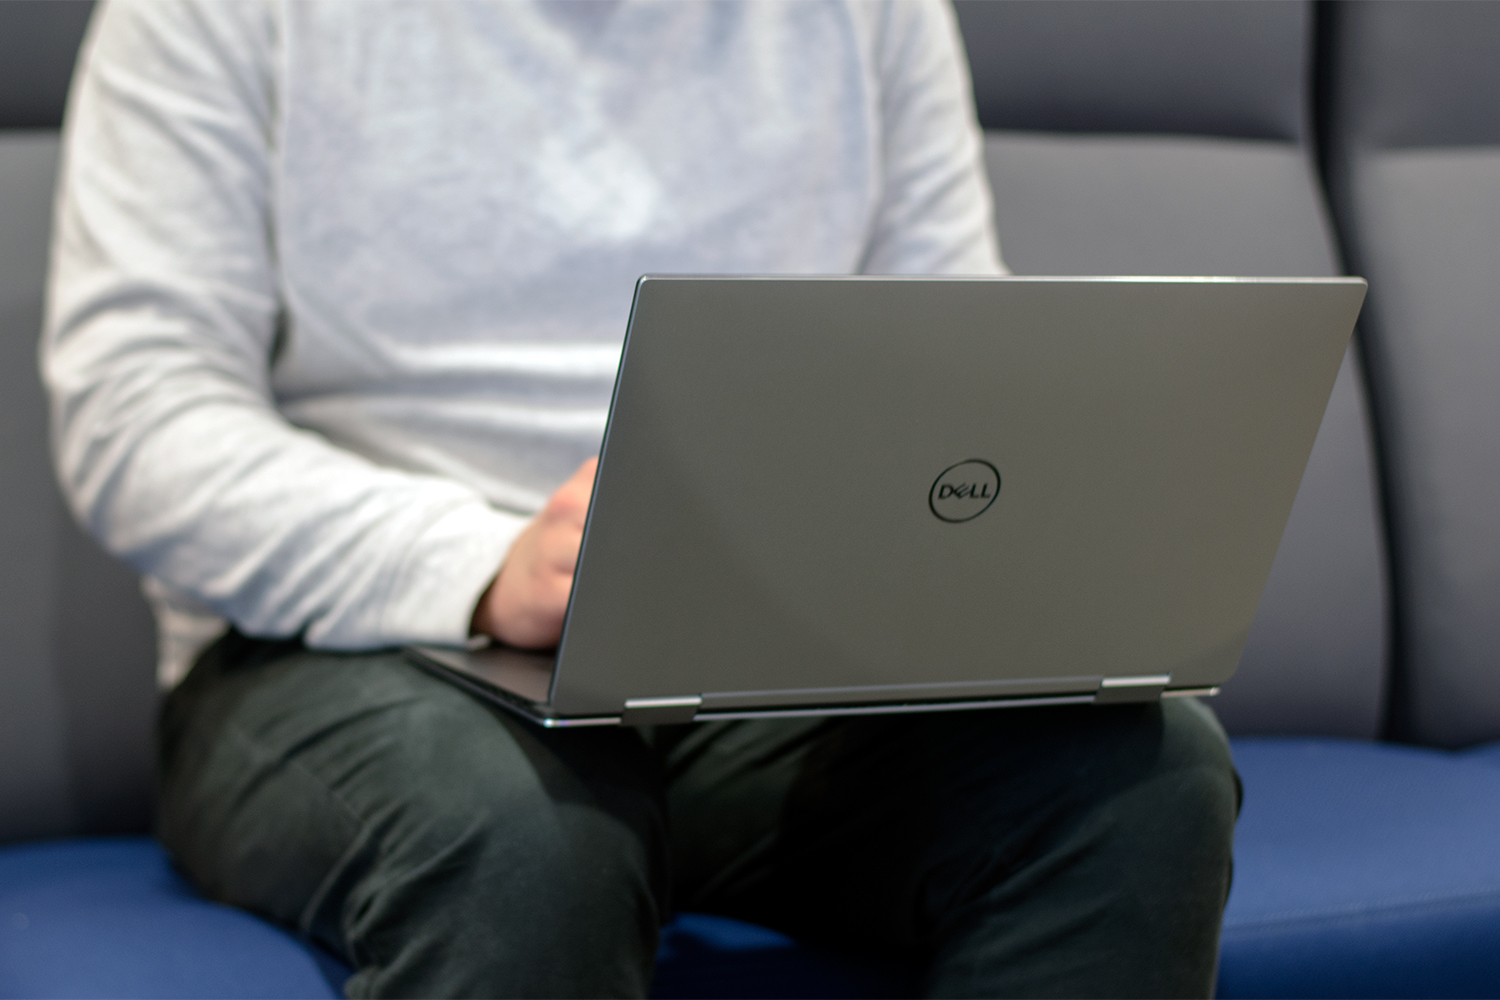 Dell's XPS 15 laptop being used on someone's lap.